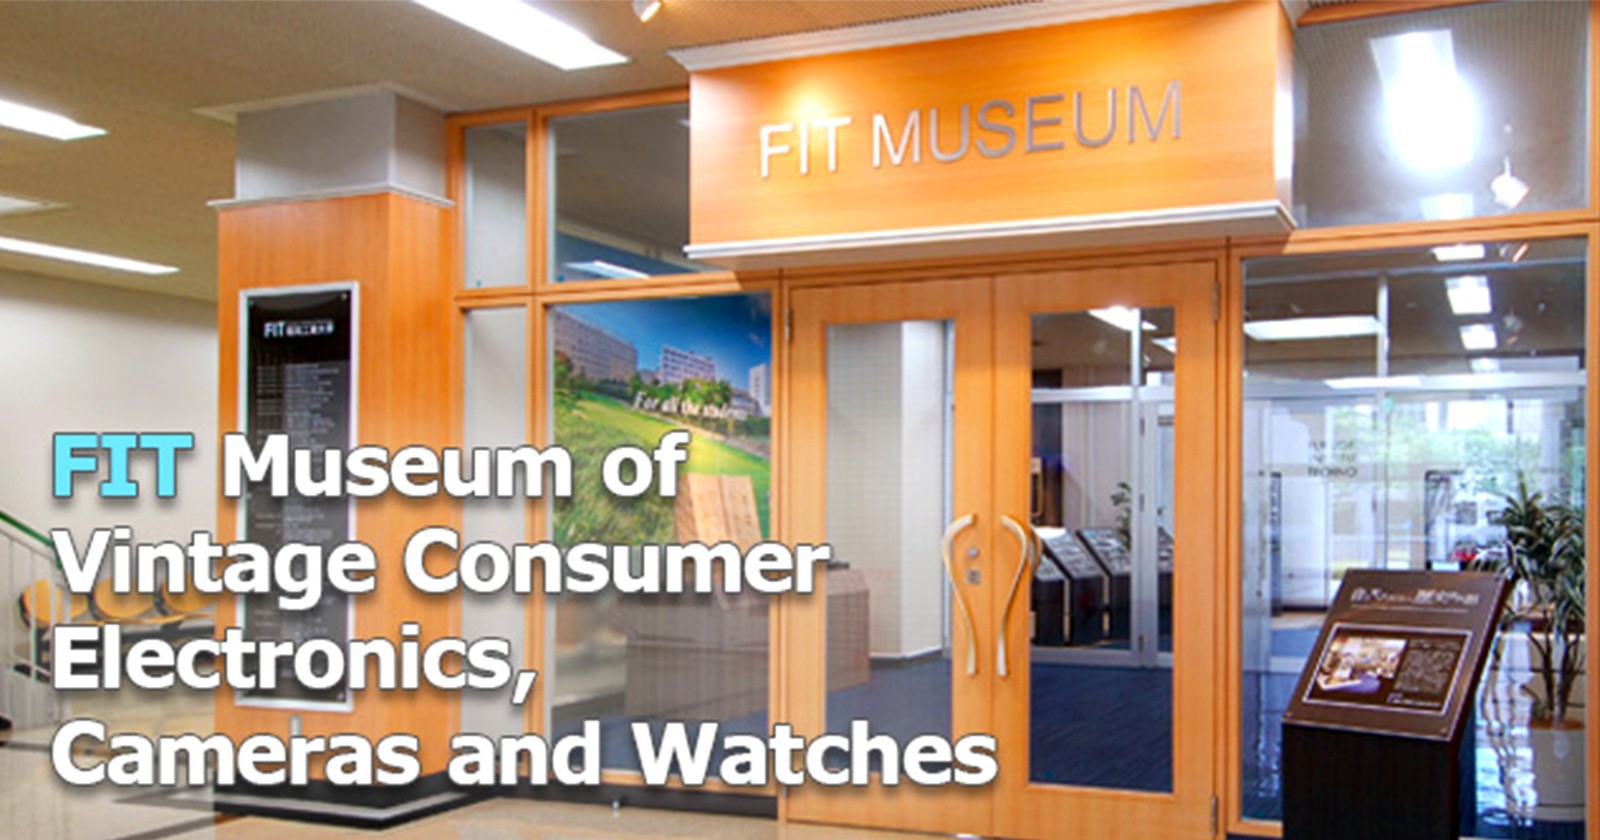 FIT Museum of Vintage Consumer Electronics, Cameras and Watches